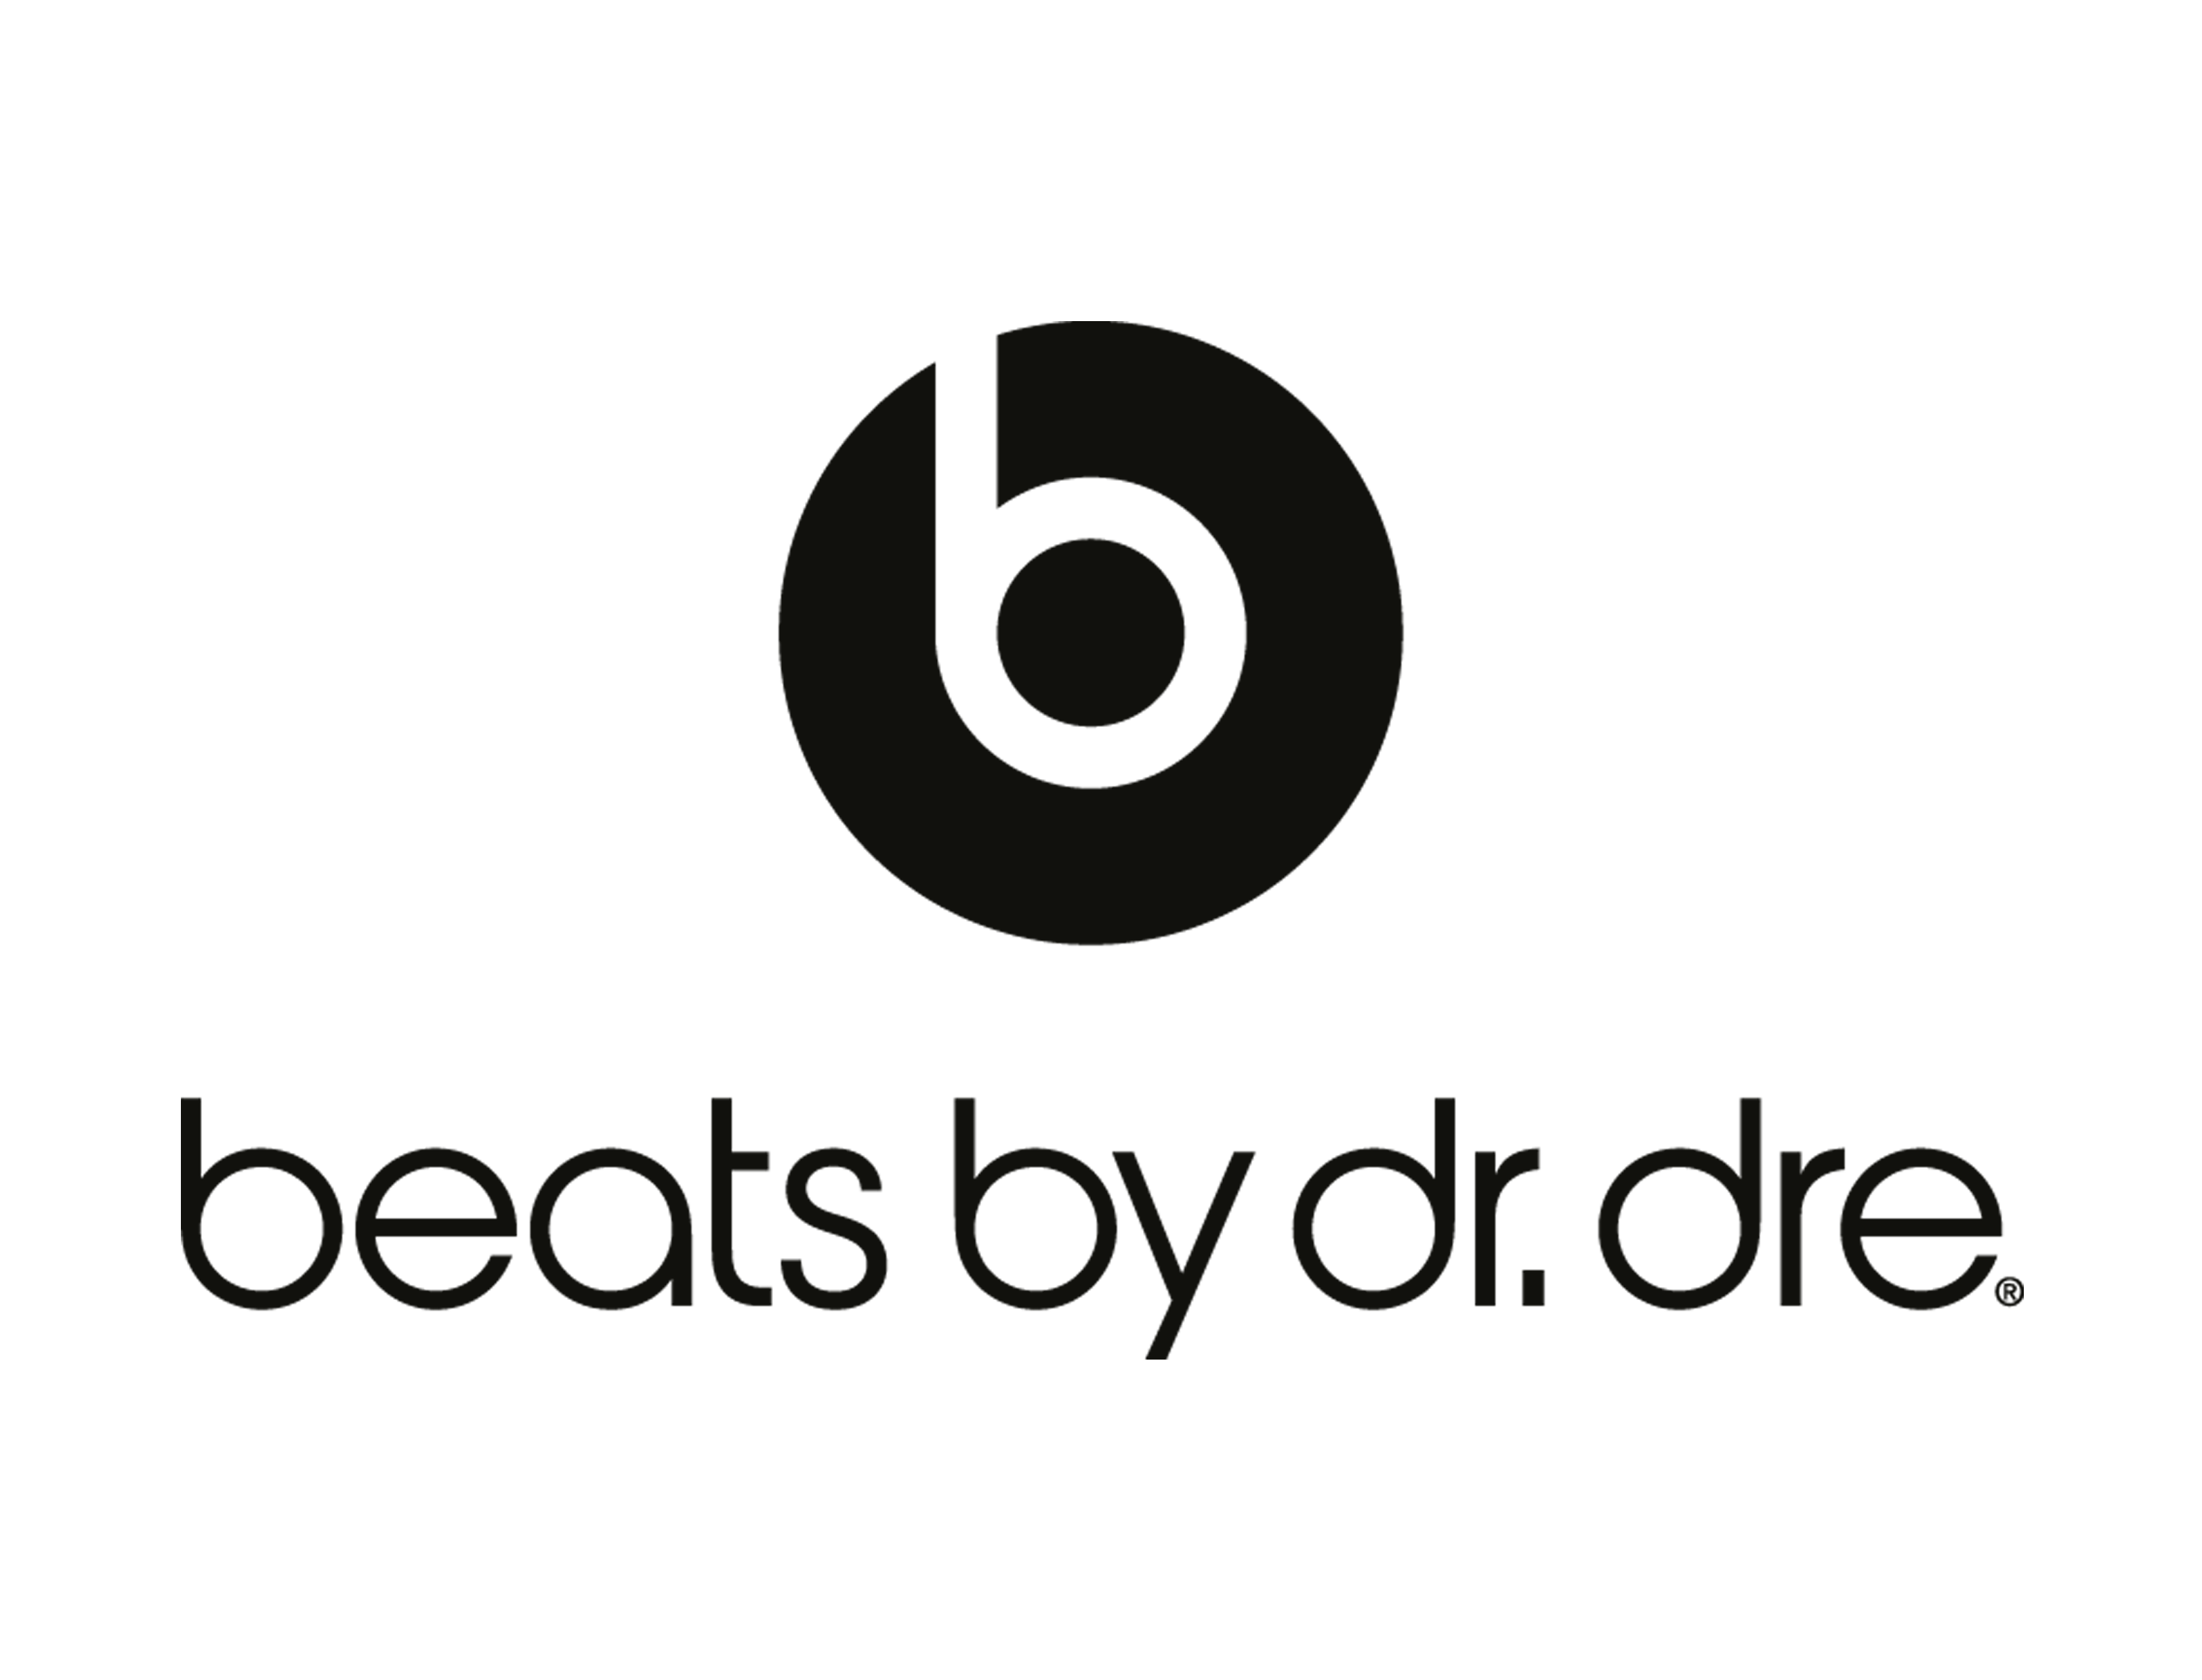 Beats by Dre Logo - Headphones. Stormfront local Apple experts